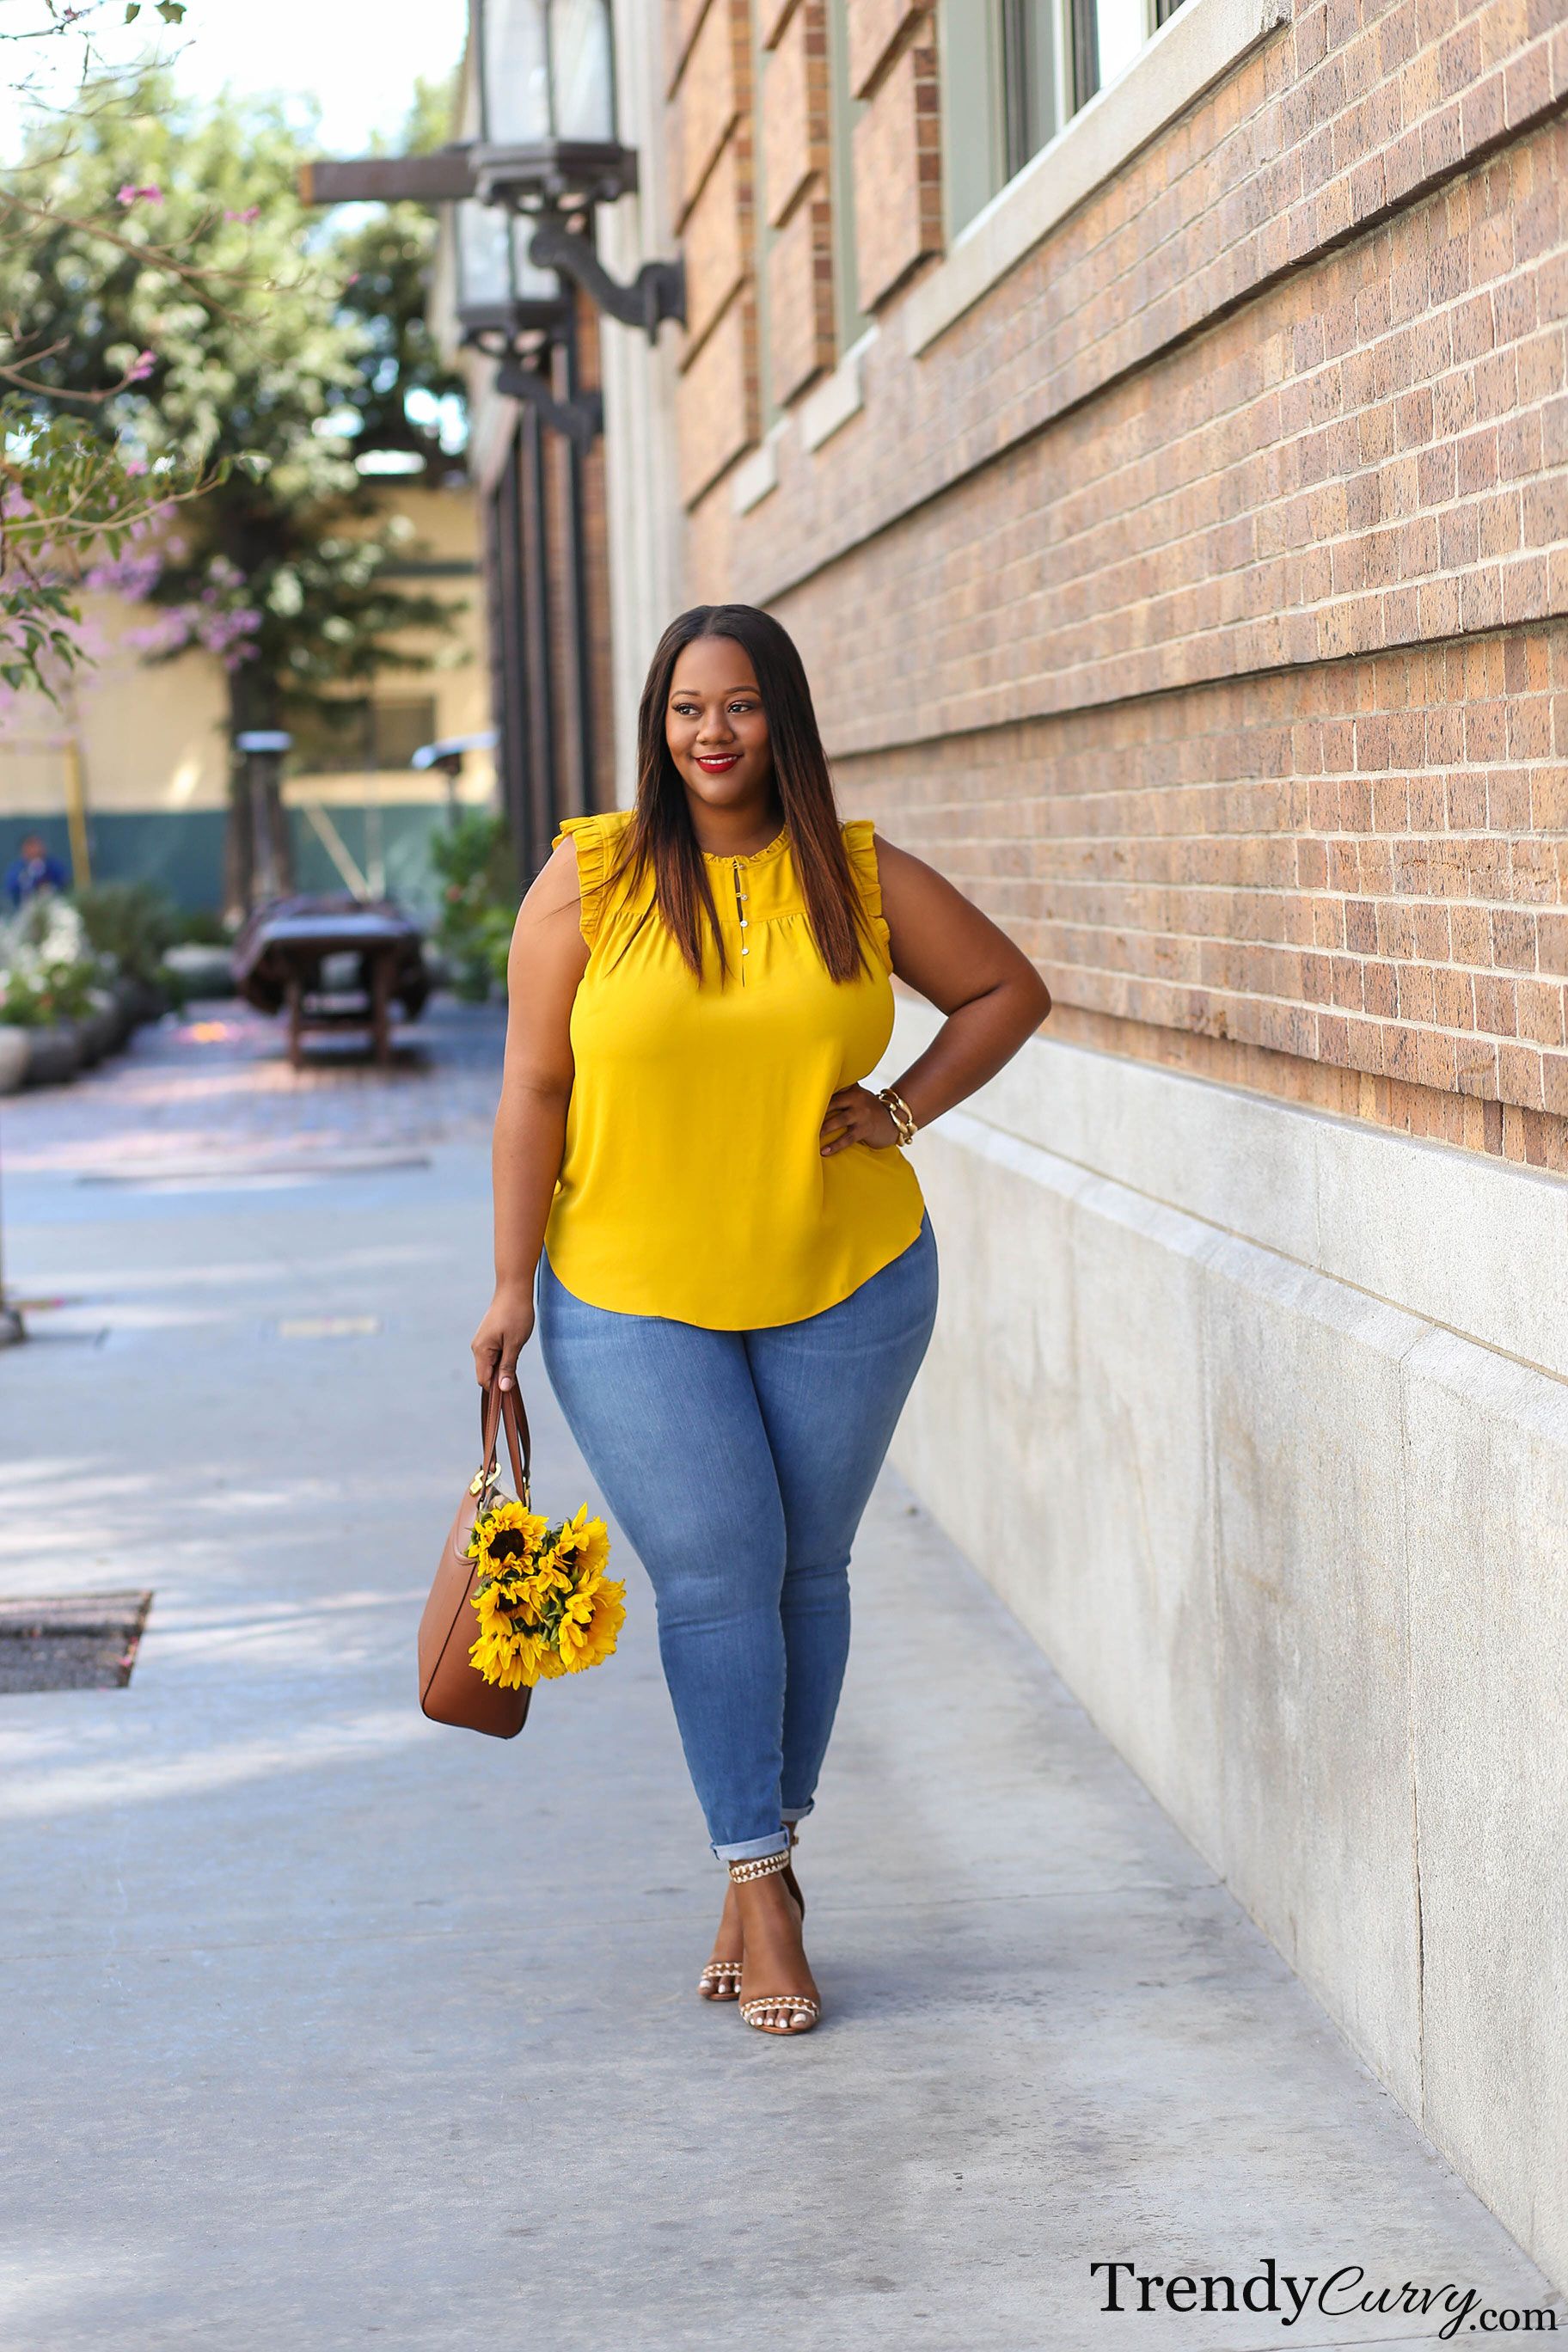 Ms. on Twitter: "#ad I'm so excited to share that I've partnered with @LOFT to announce their new size collection (sizes To celebrate, I'm hosting a fun LOFT